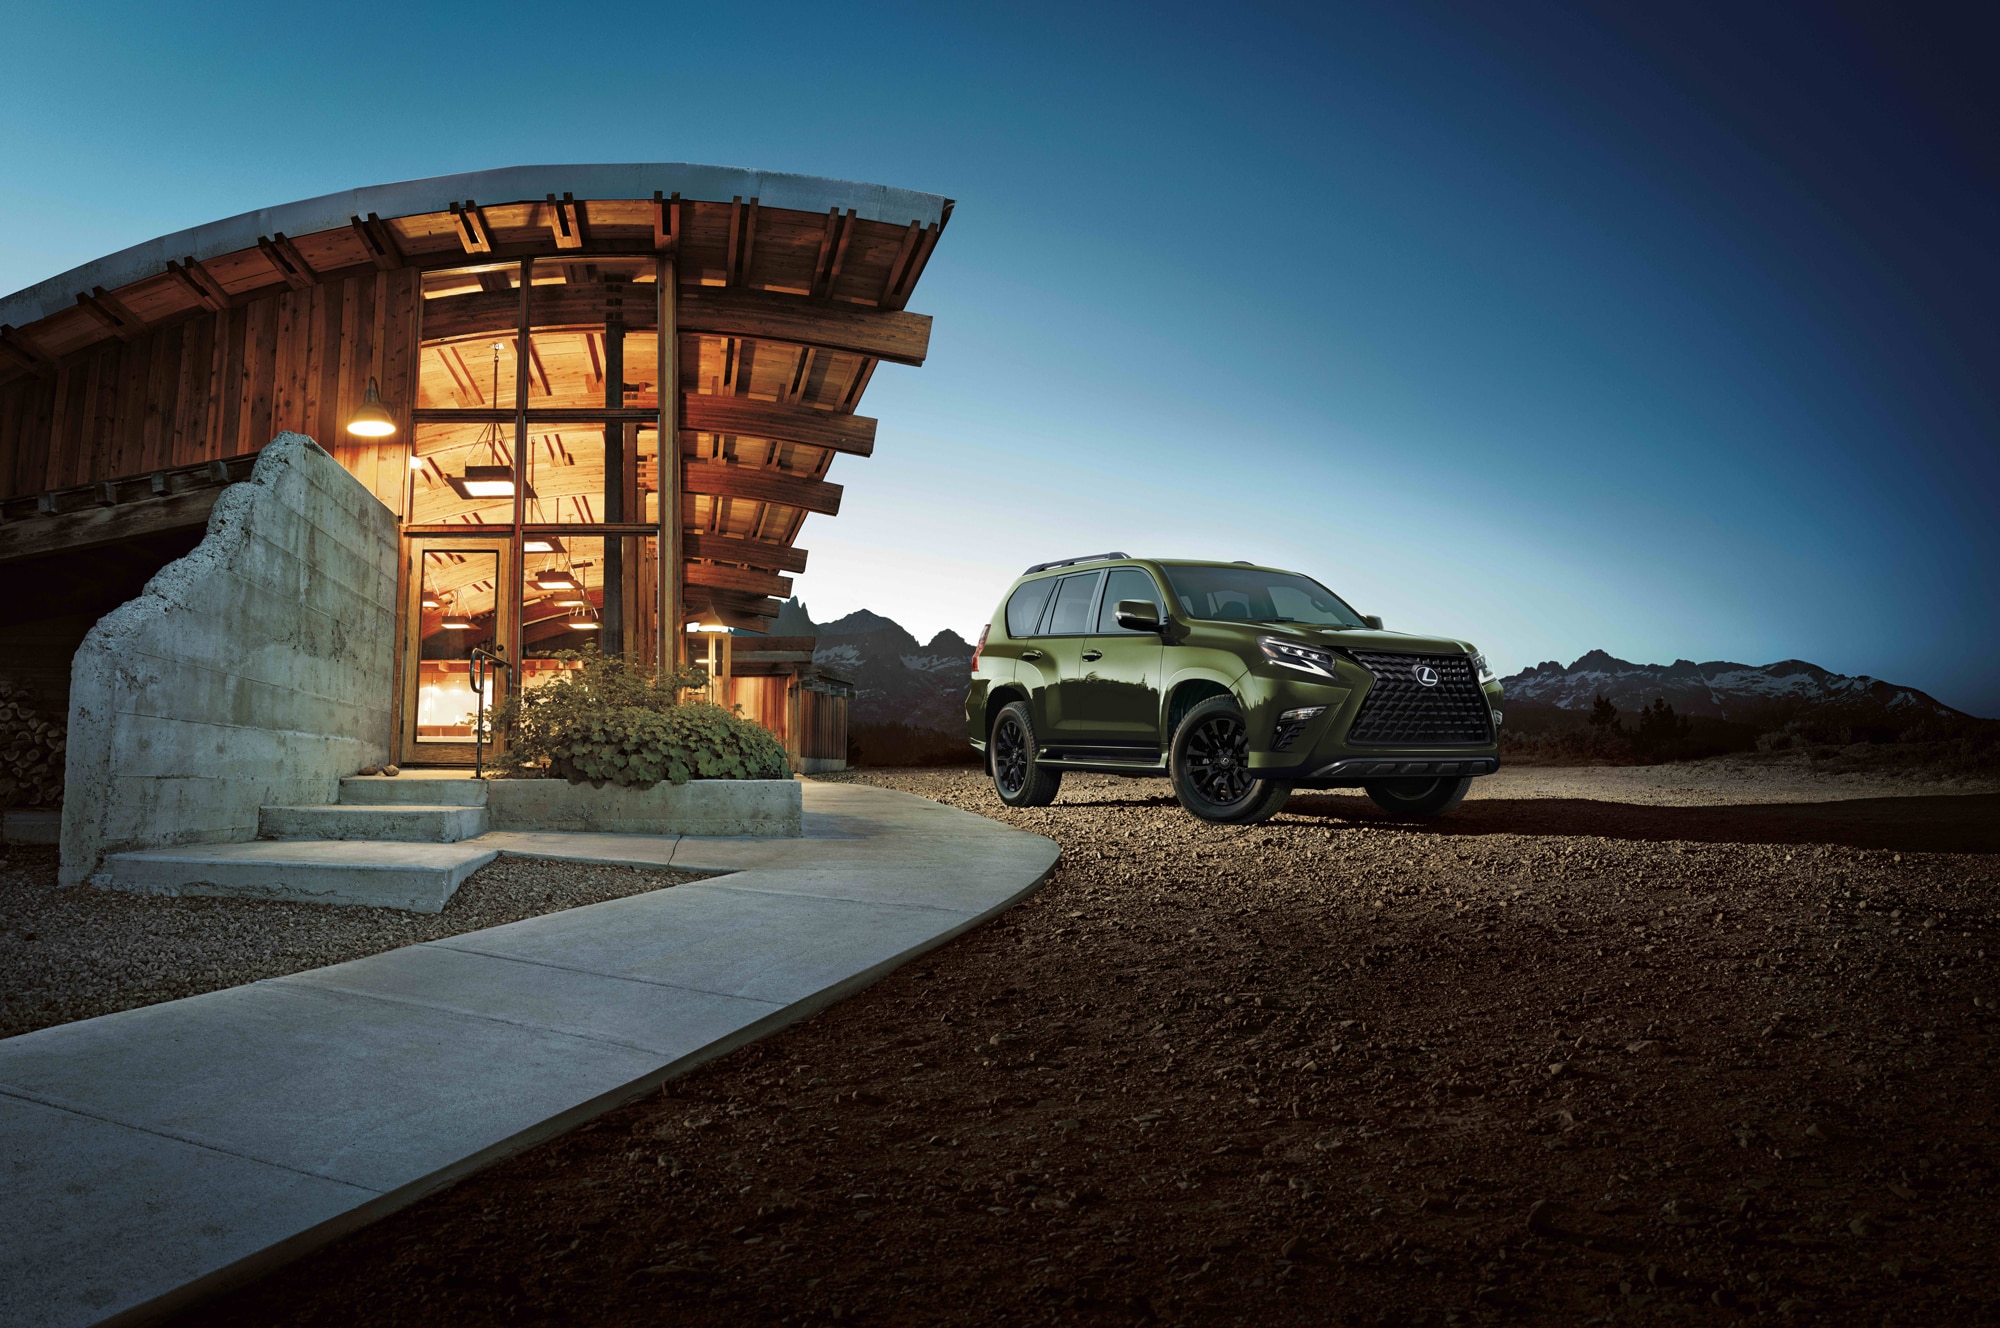 Green Lexus GX outside house with lighting in the mountains